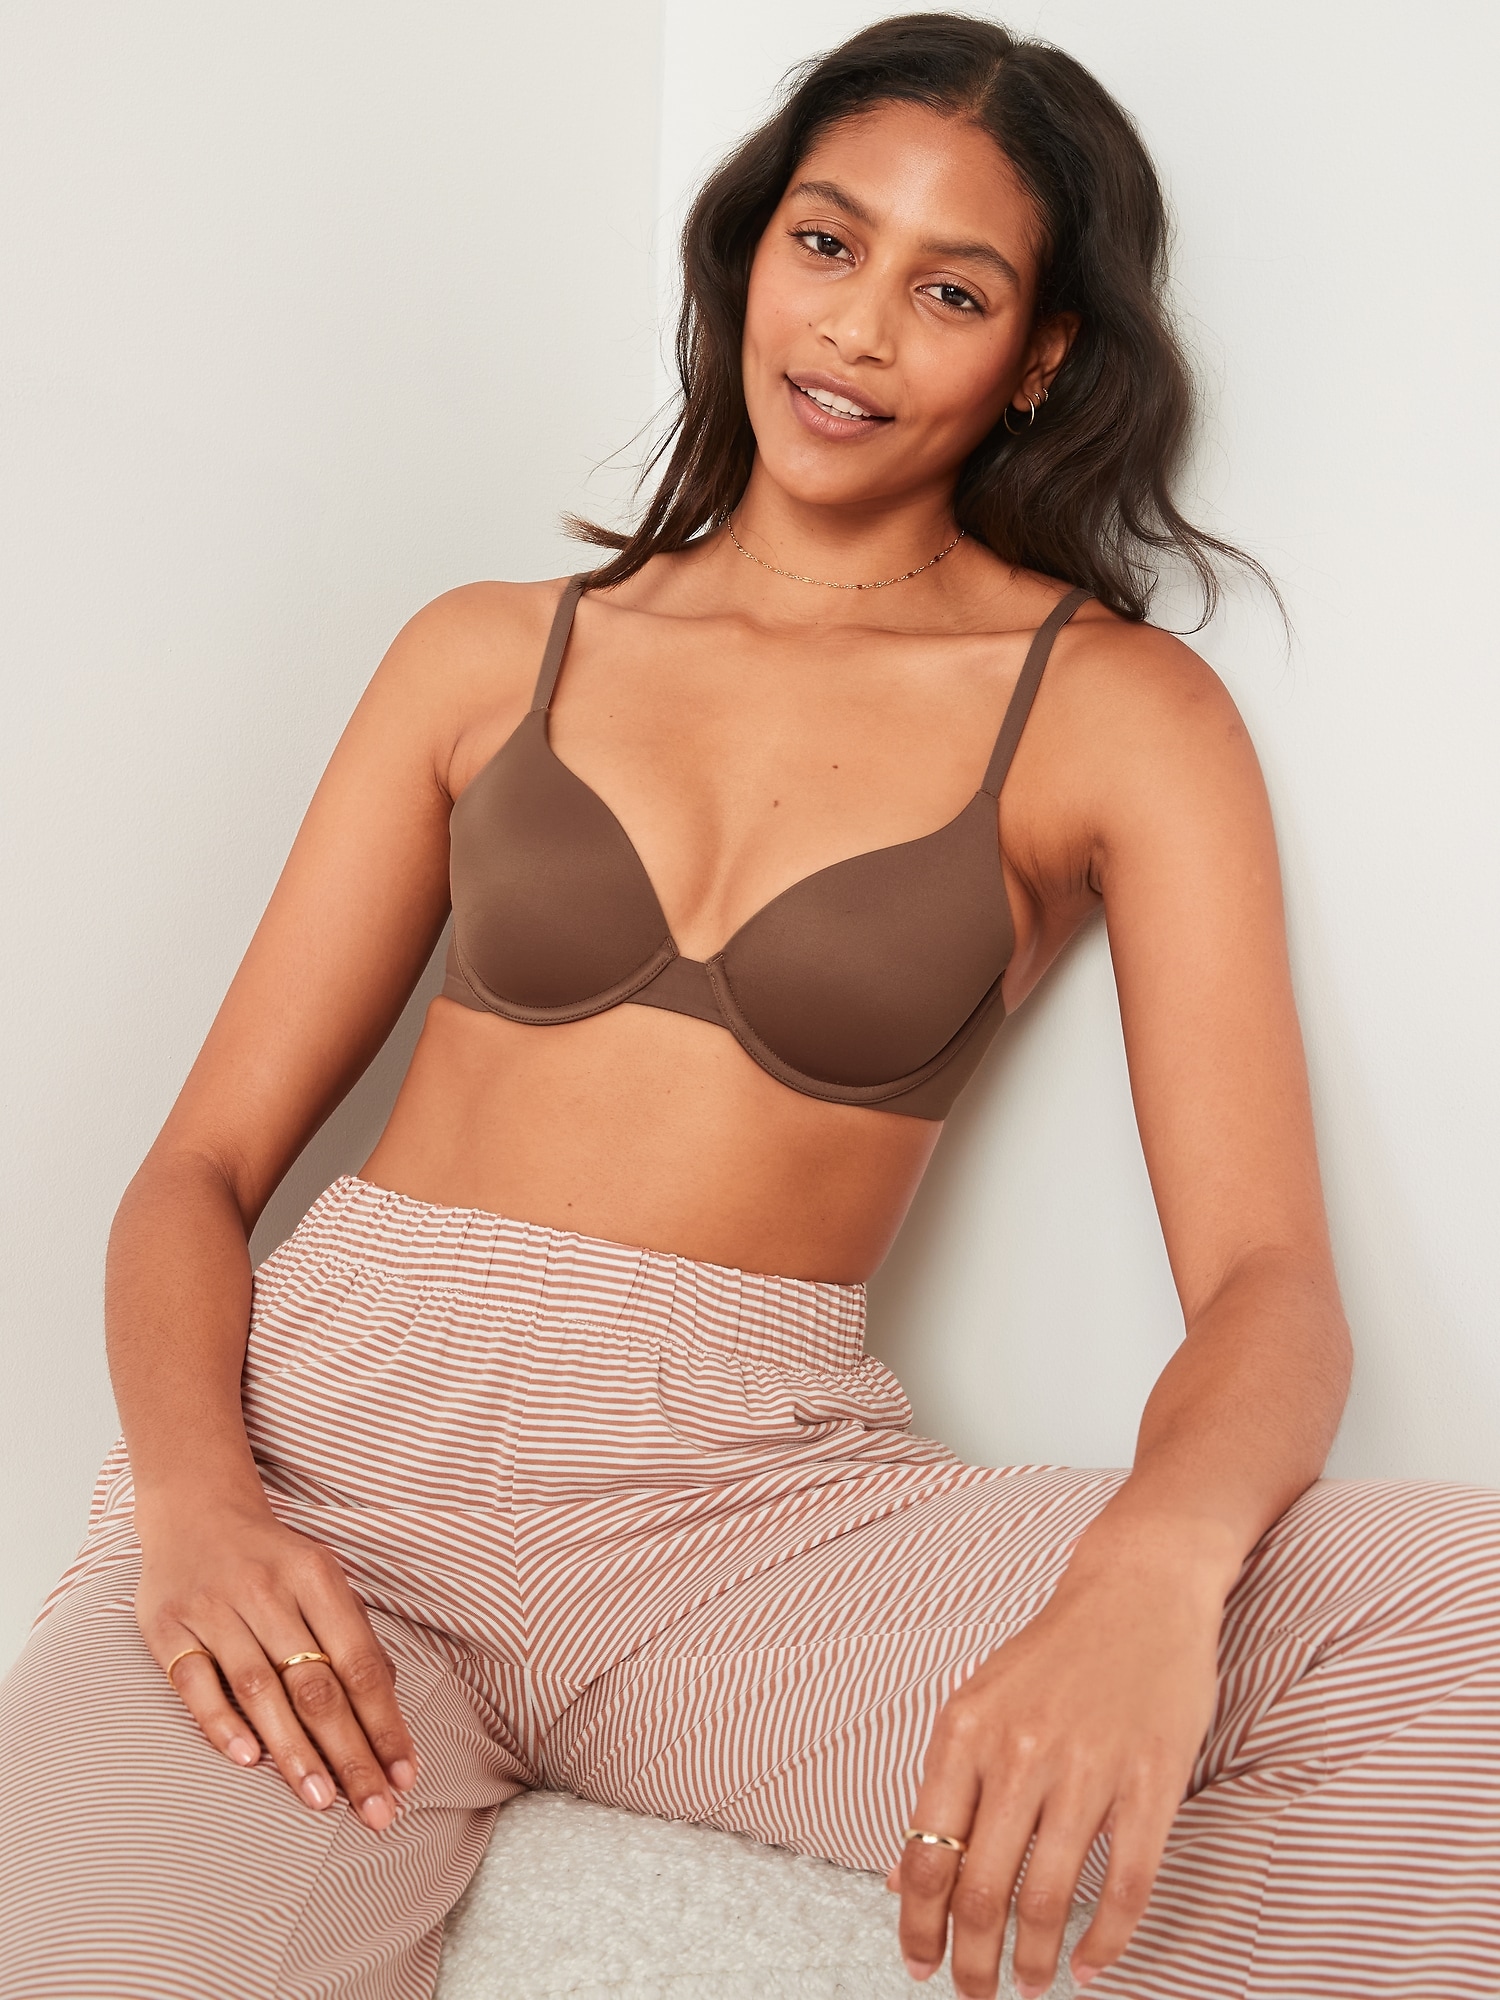 Women's bra for every size